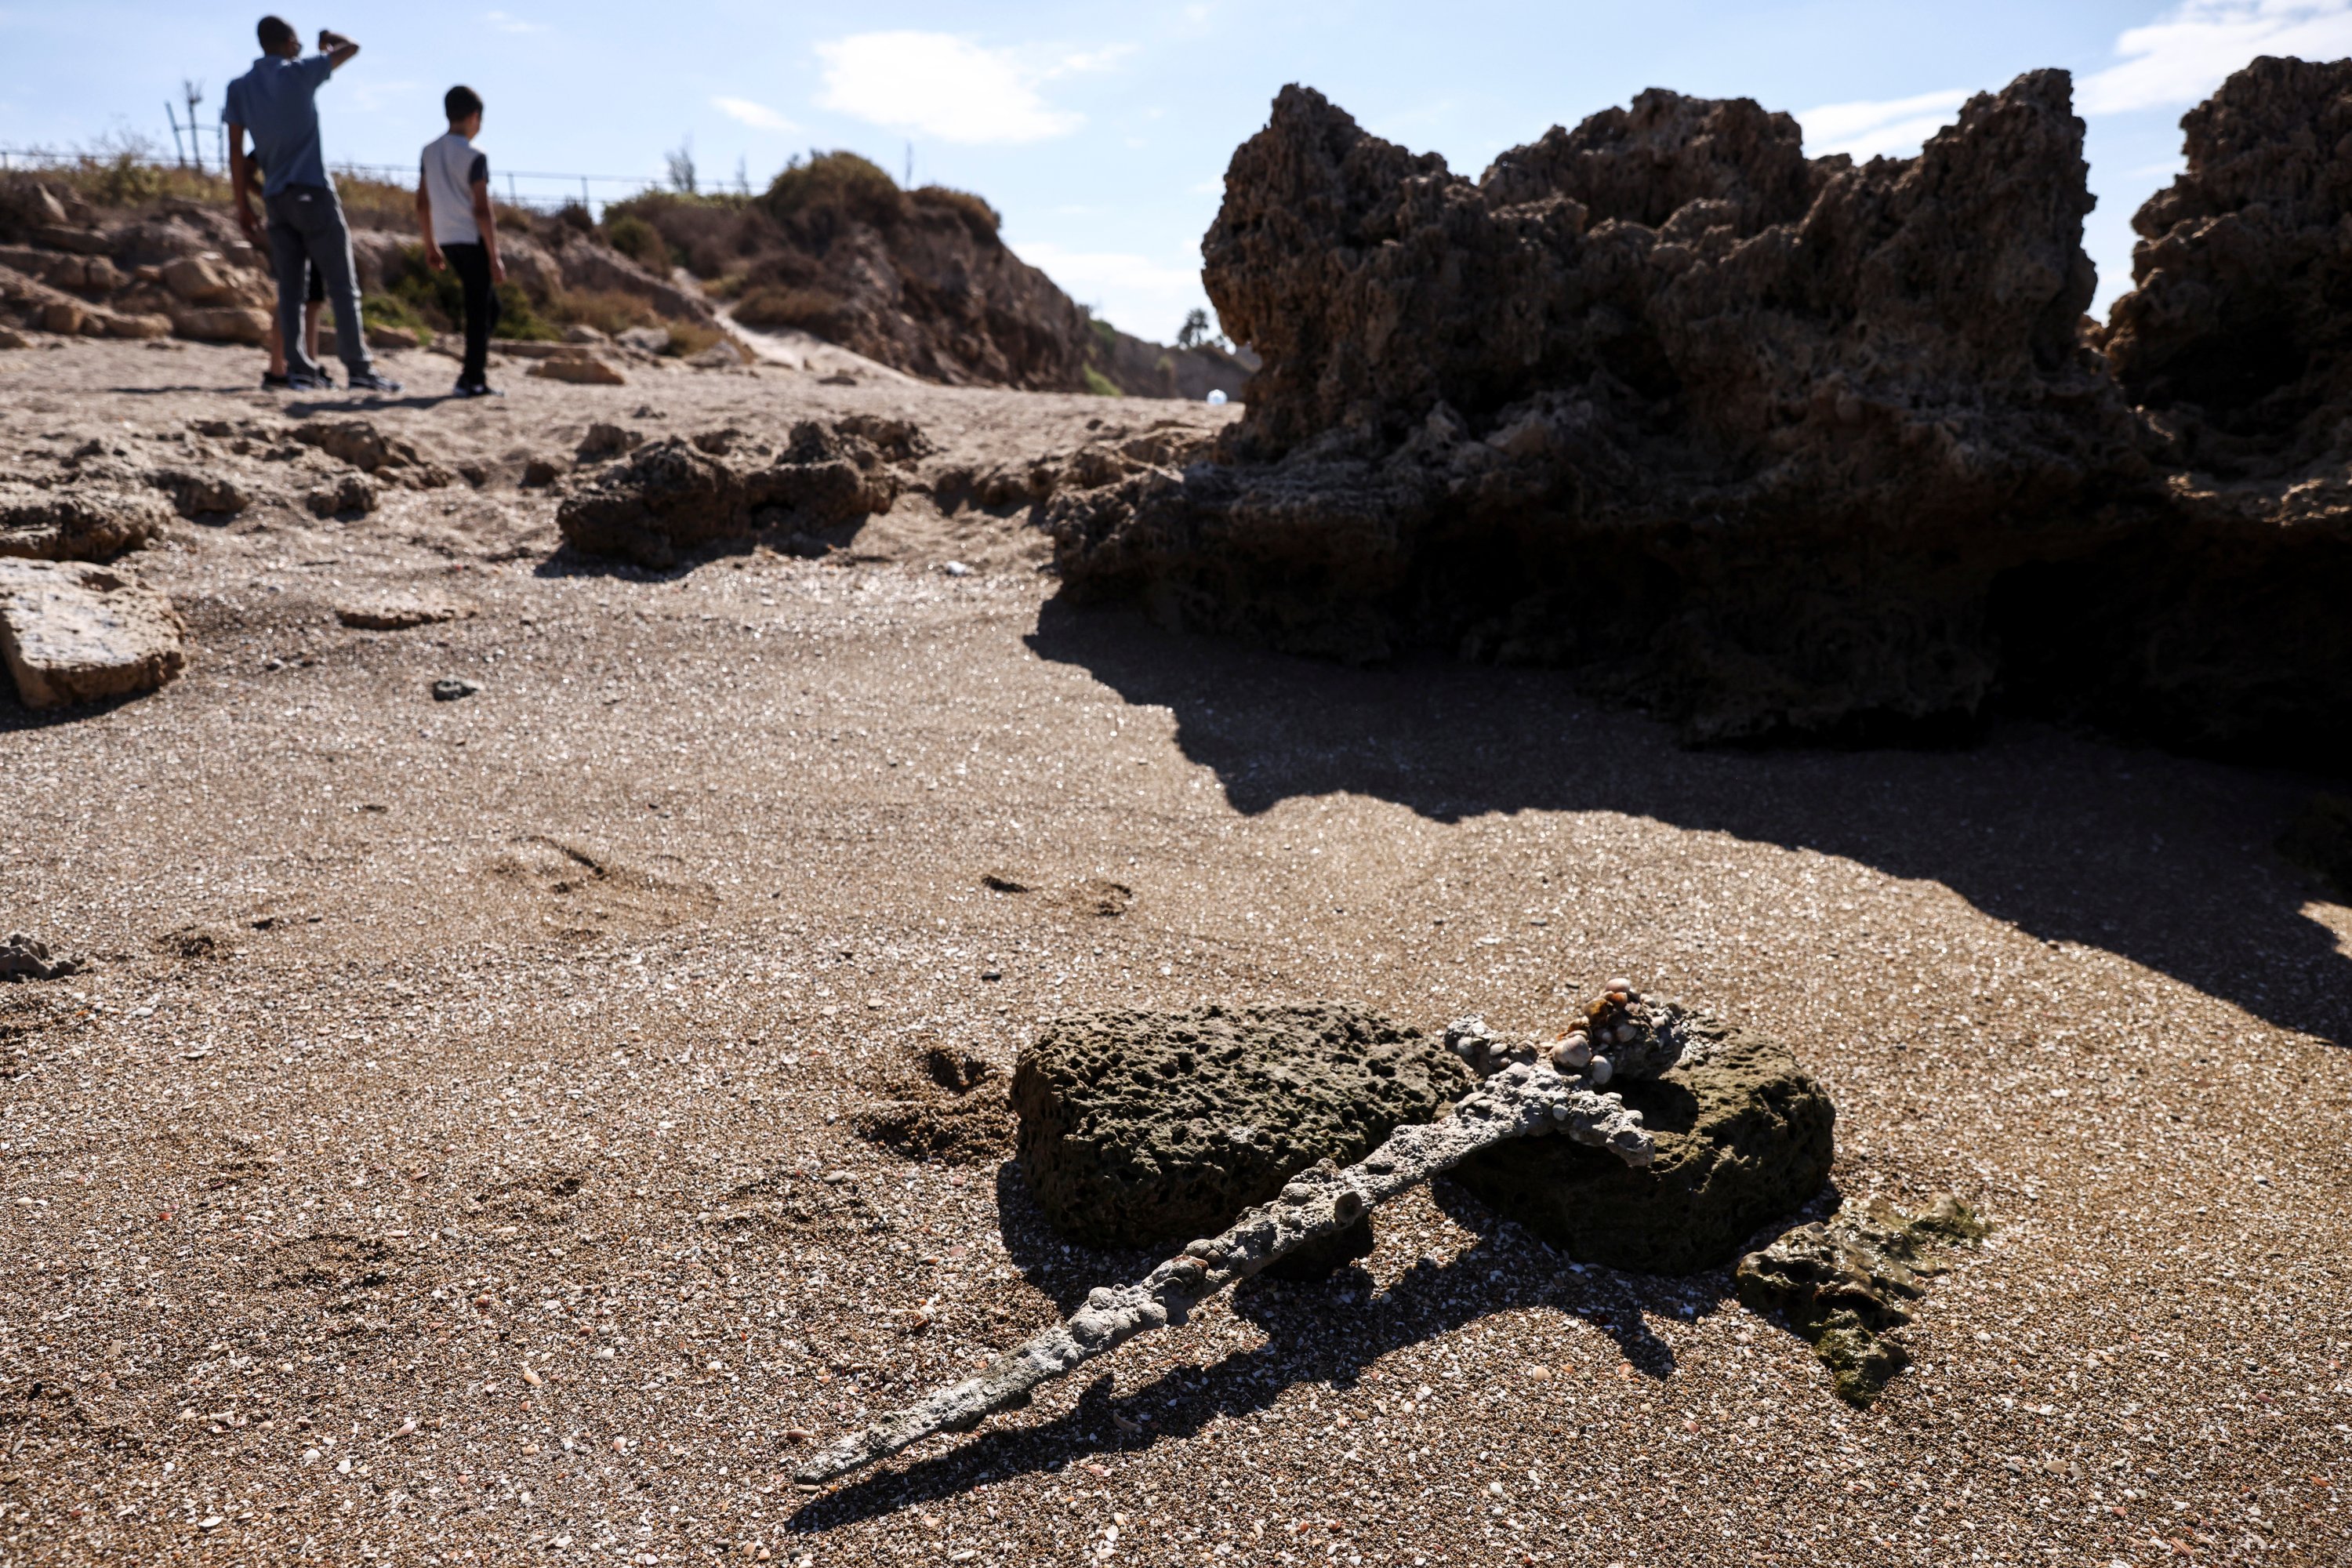 The sword believed to have belonged to a Crusader lays on the beach near to where it was recovered from the Mediterranean seabed by an amateur diver, Caesarea, Israel Oct. 18, 2021. (REUTERS Photo)